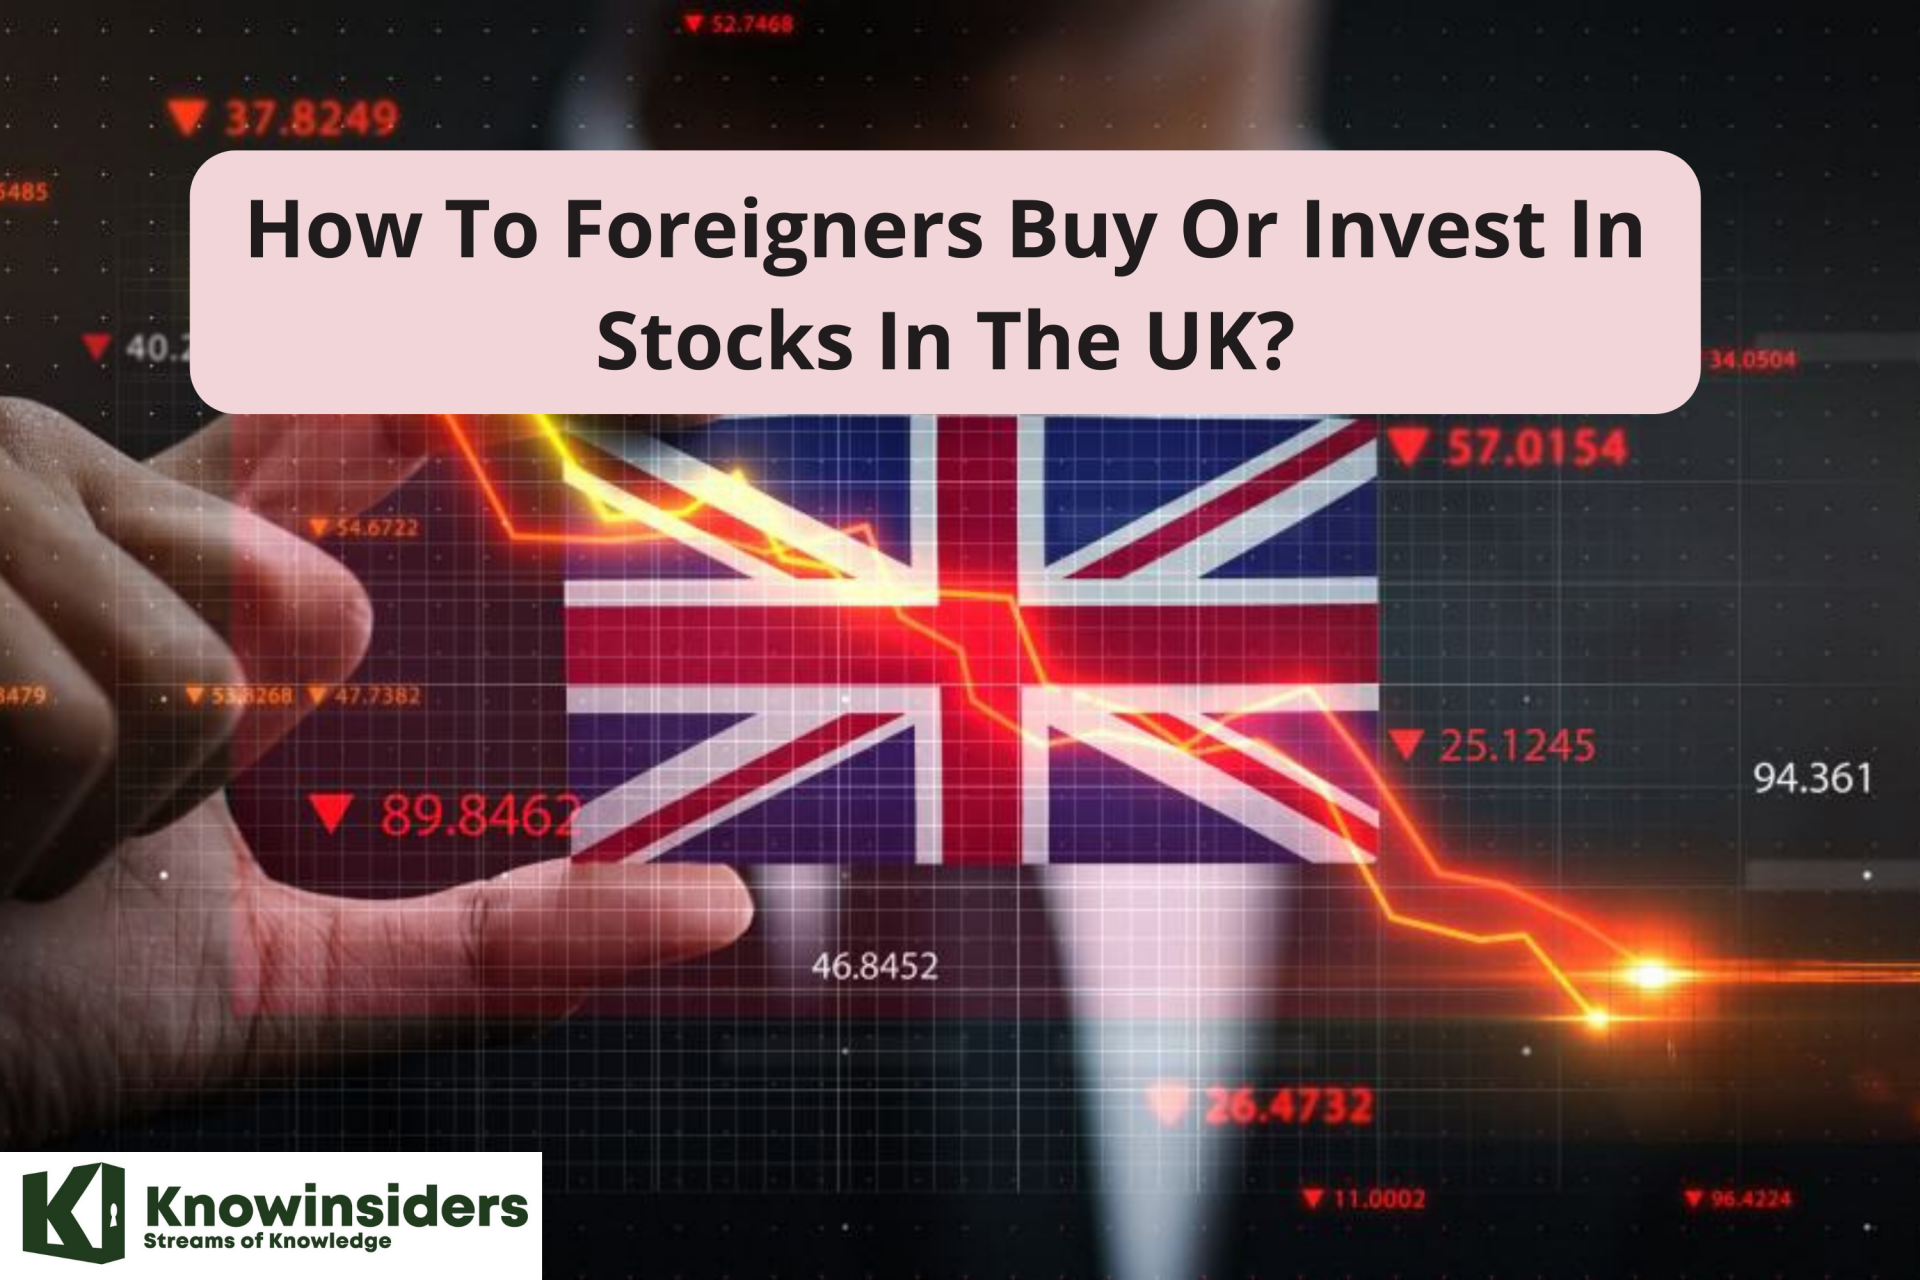 can foreigners buy or invest in uk stock market